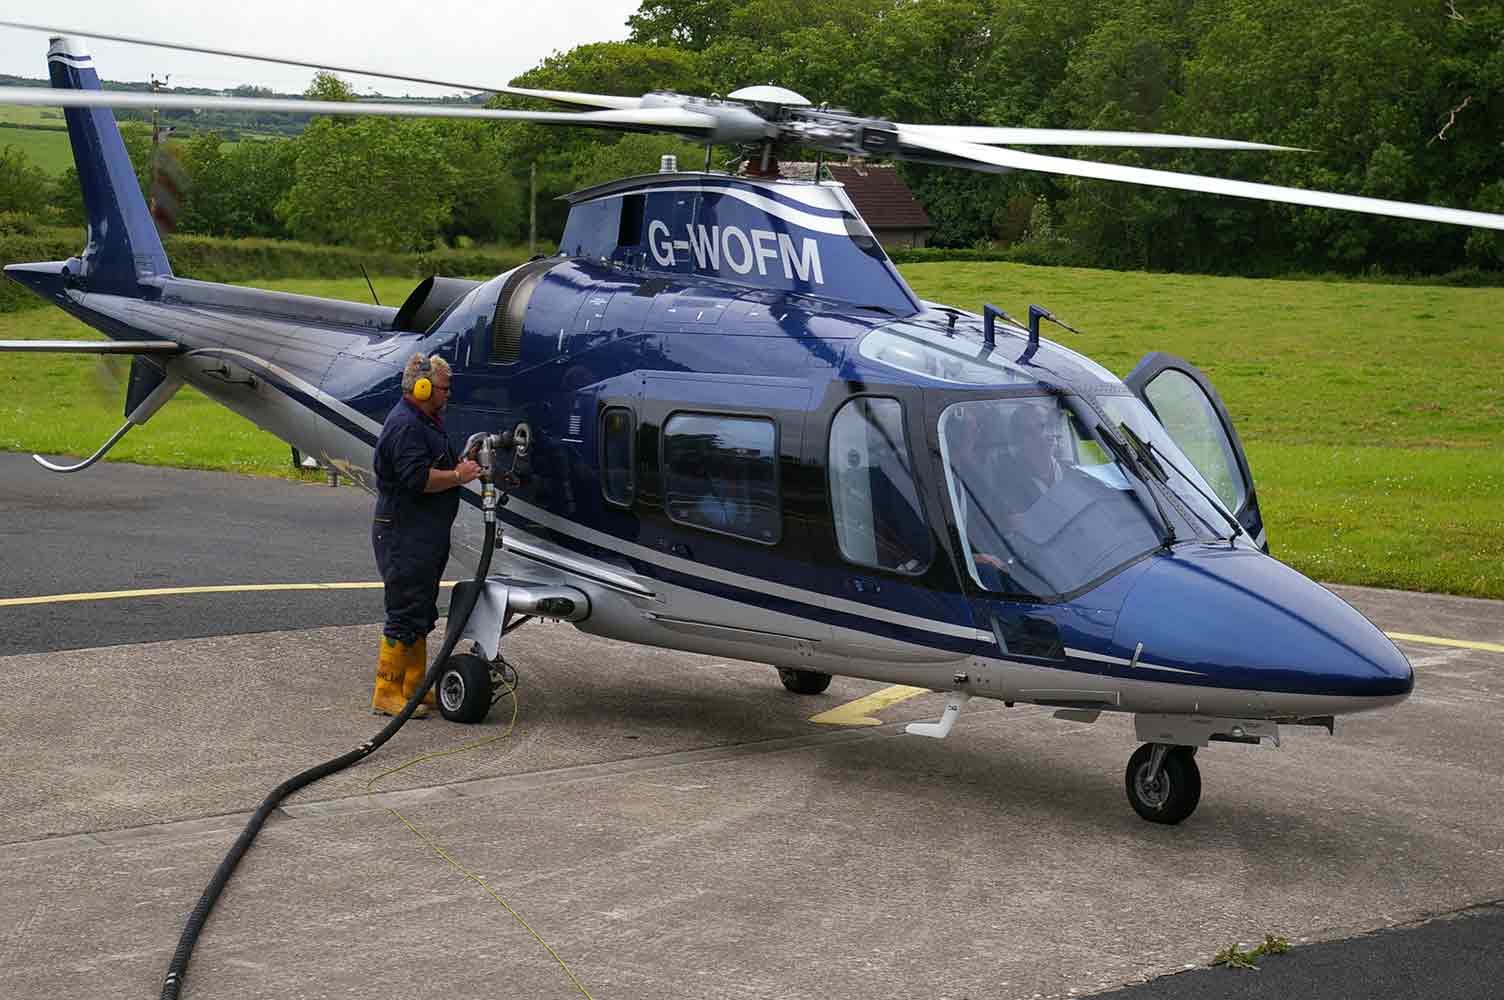 Refuelling Helicopter